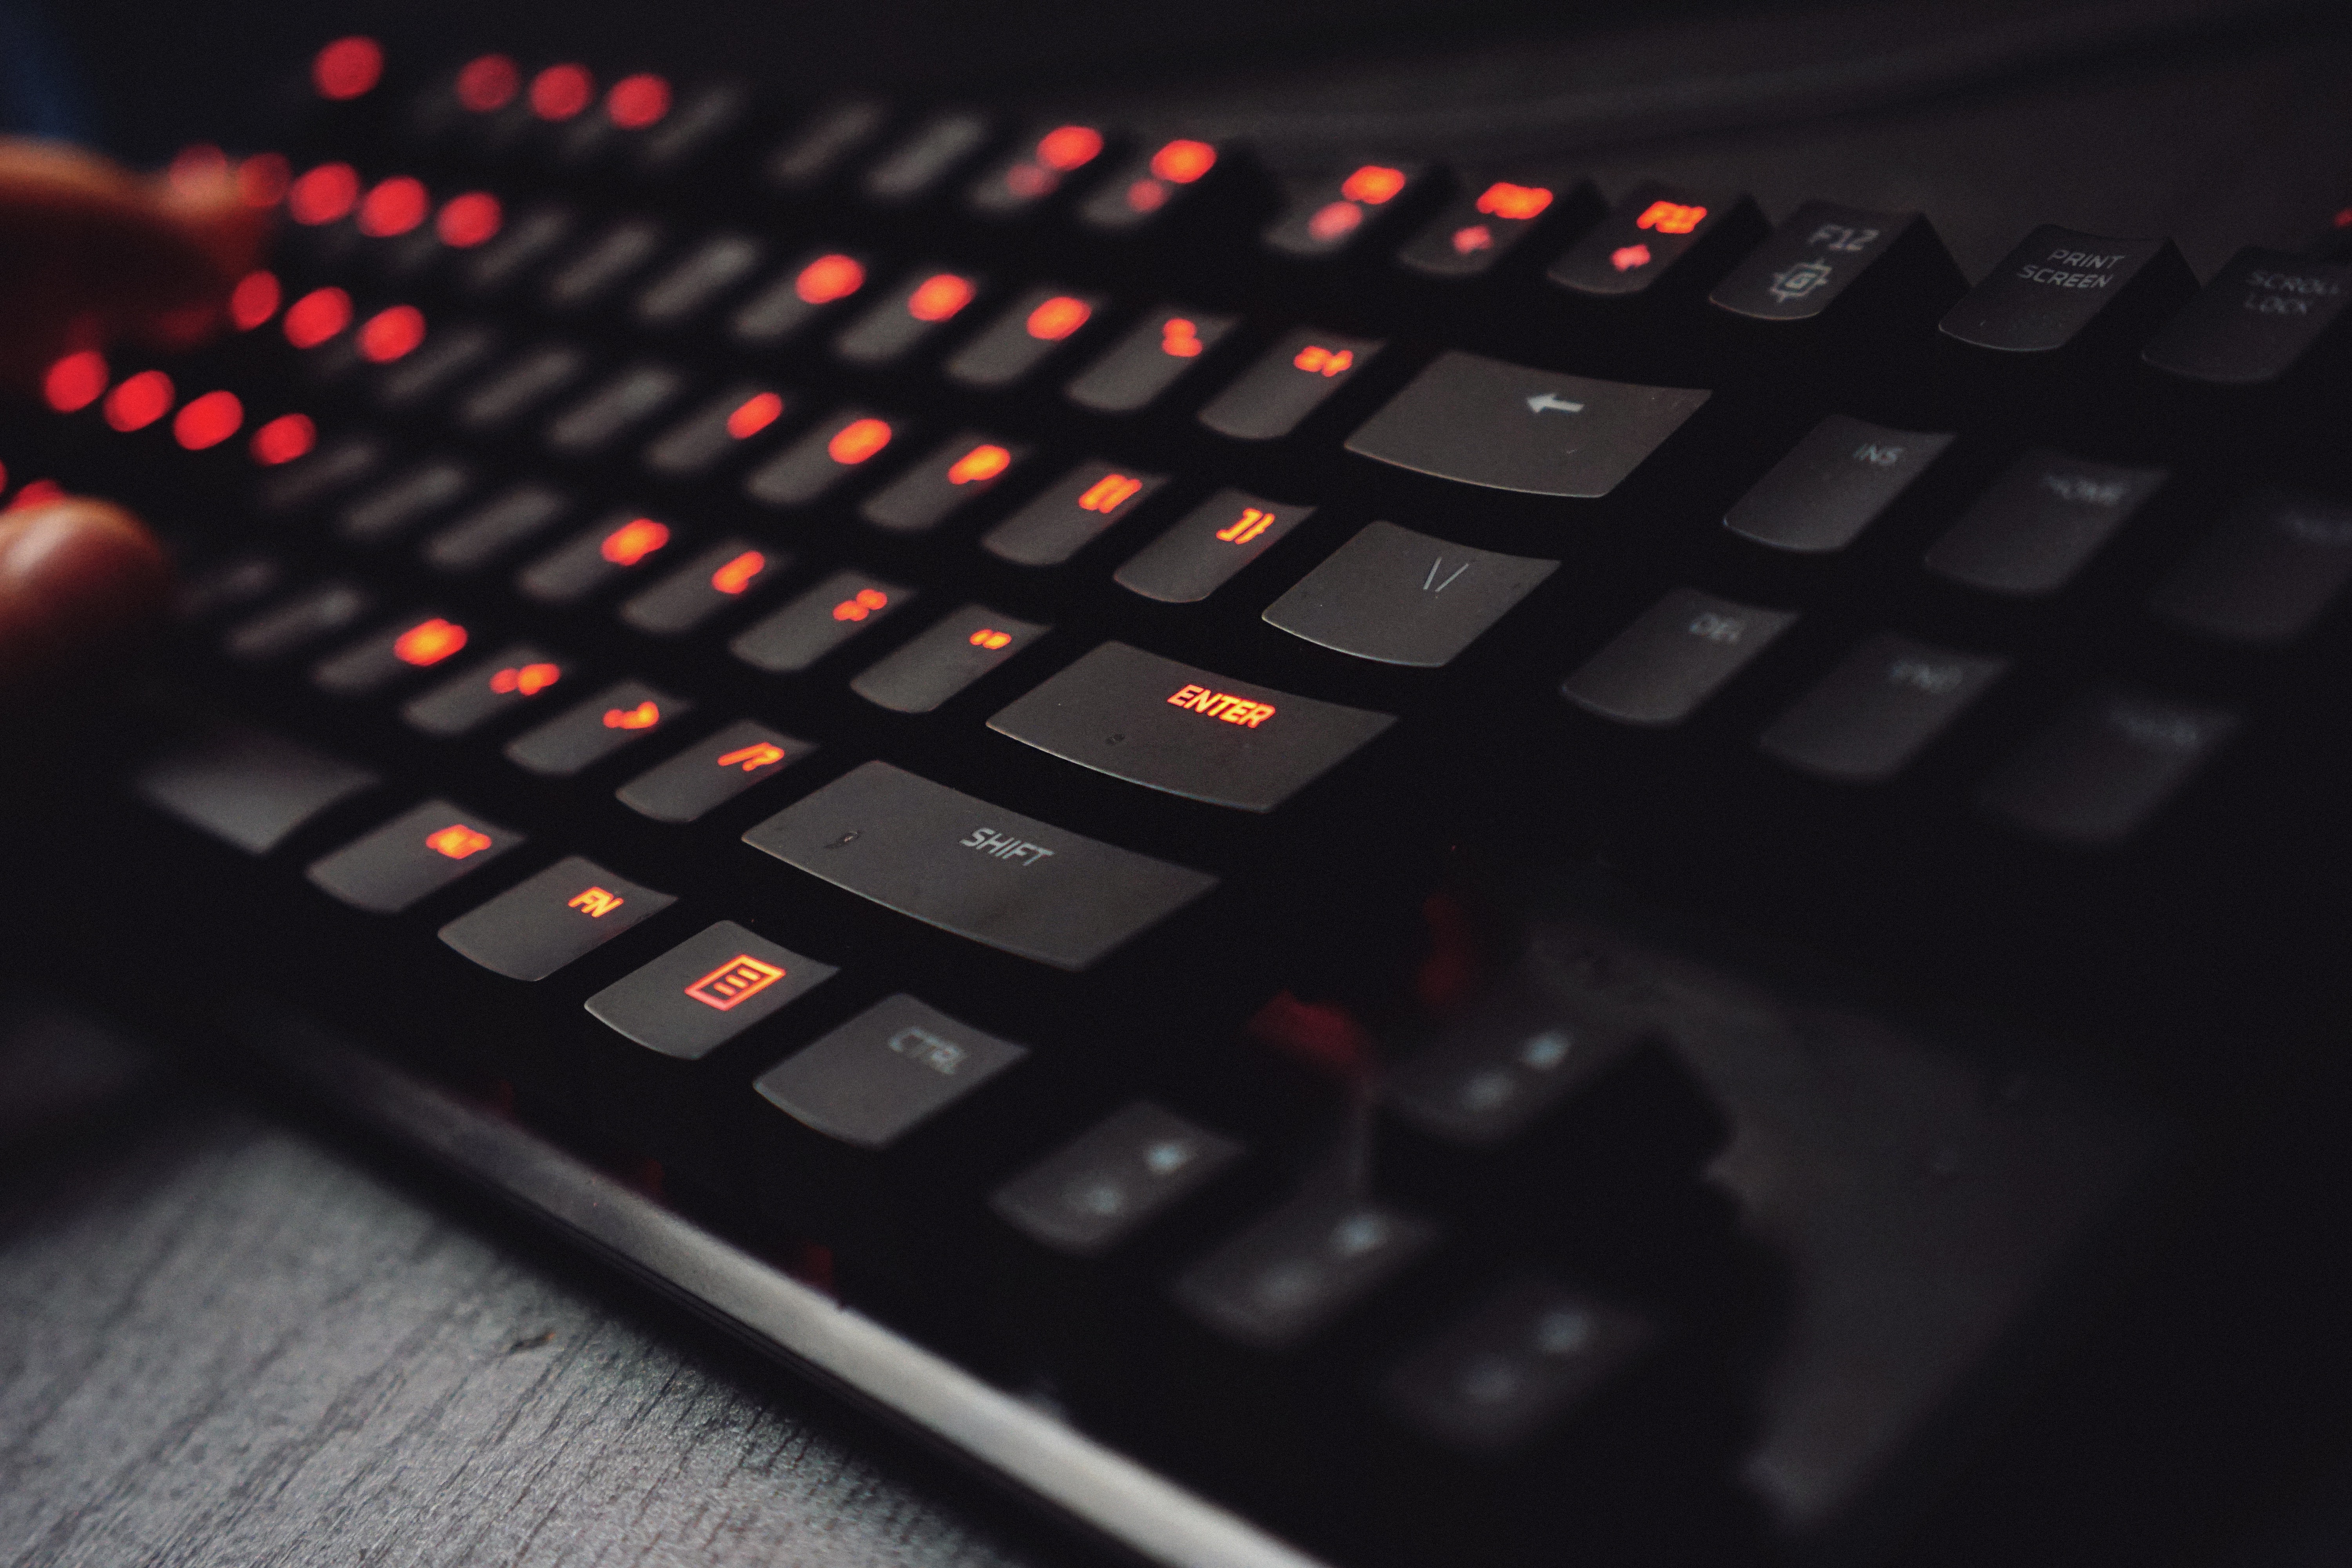 Keyboard with red back light.